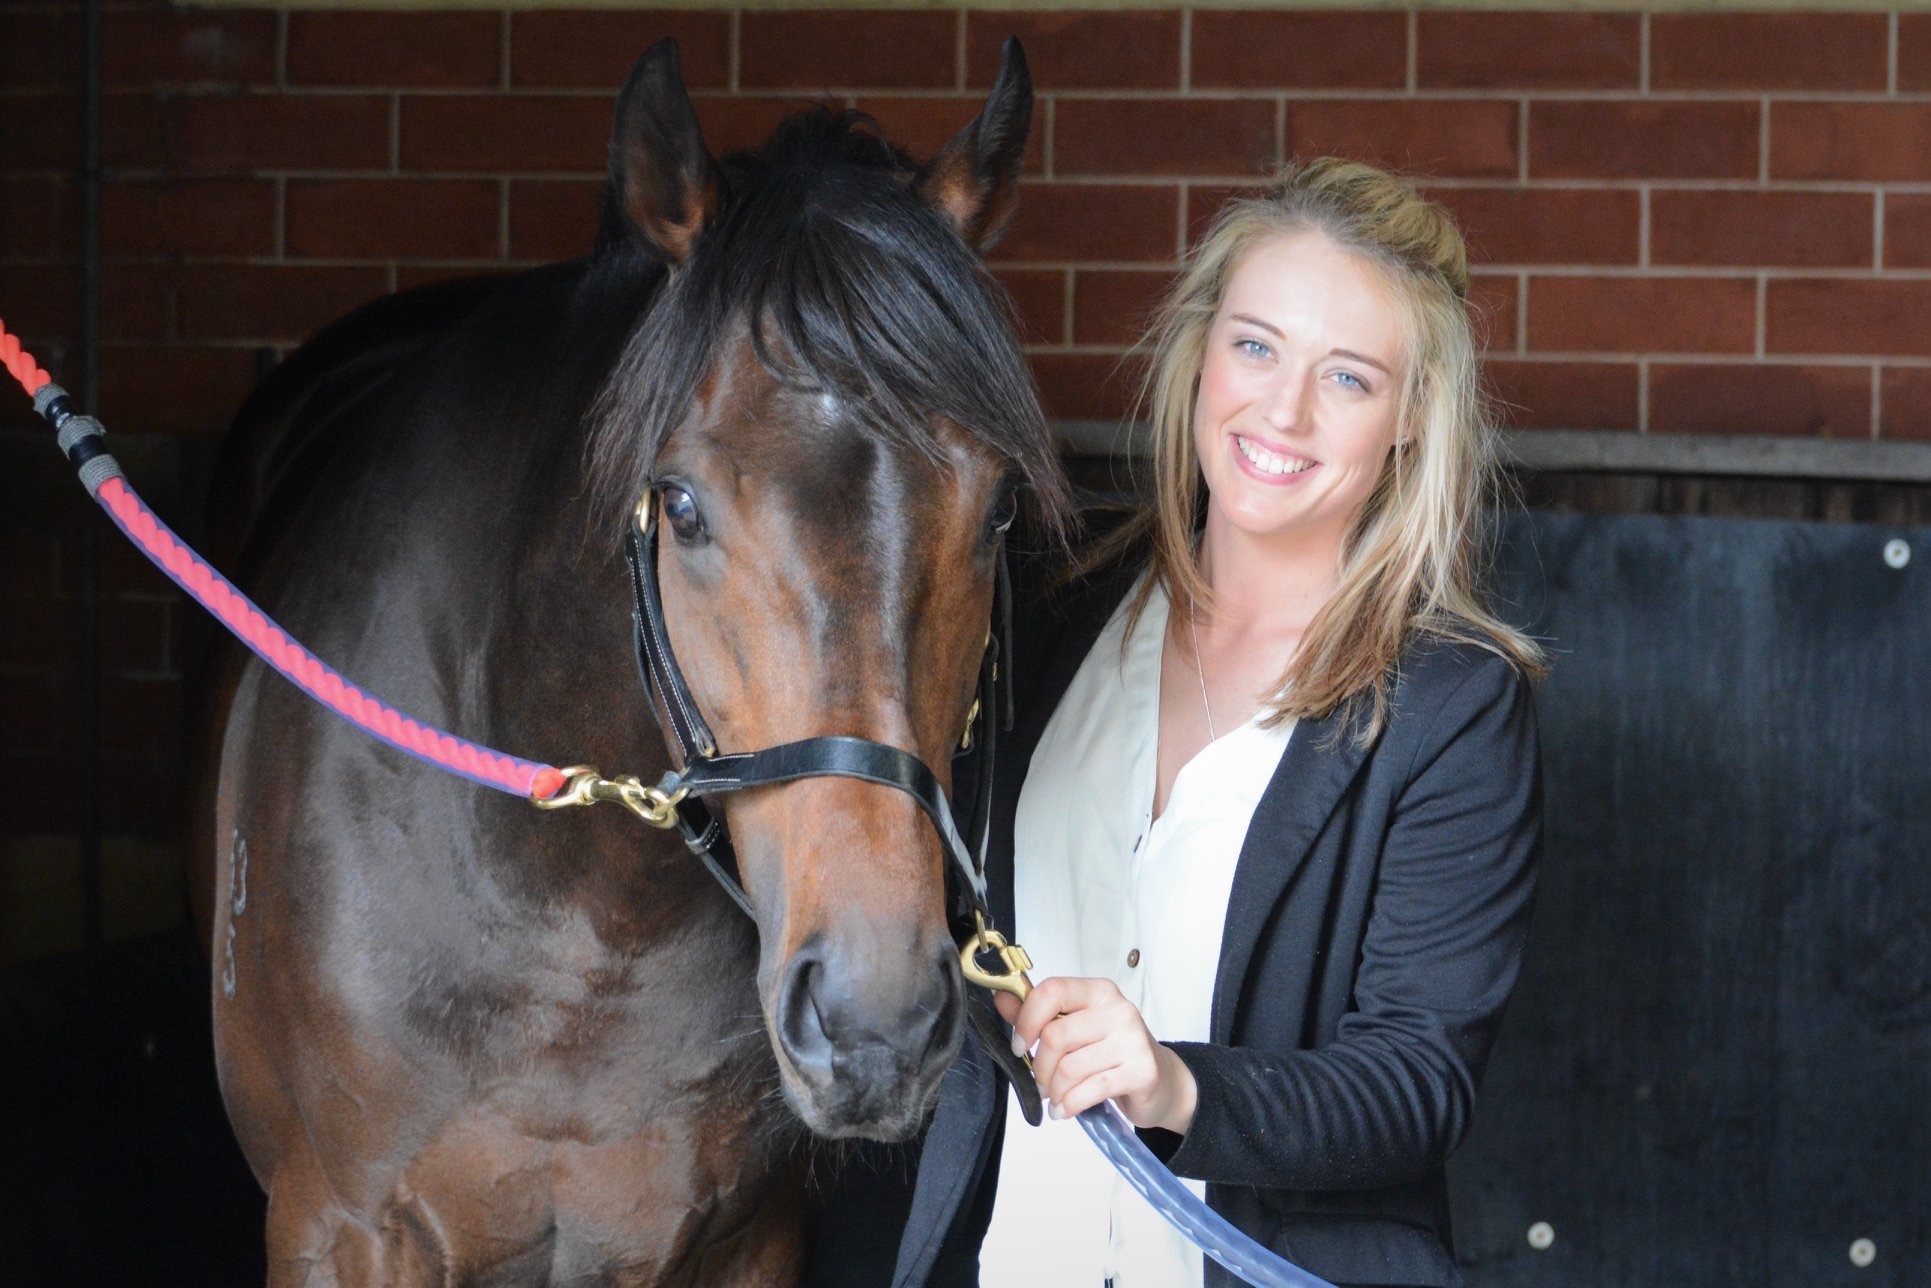 Celebrating the Melbourne Cup | A chat with Aleisha Legg, strapper of The Chosen One